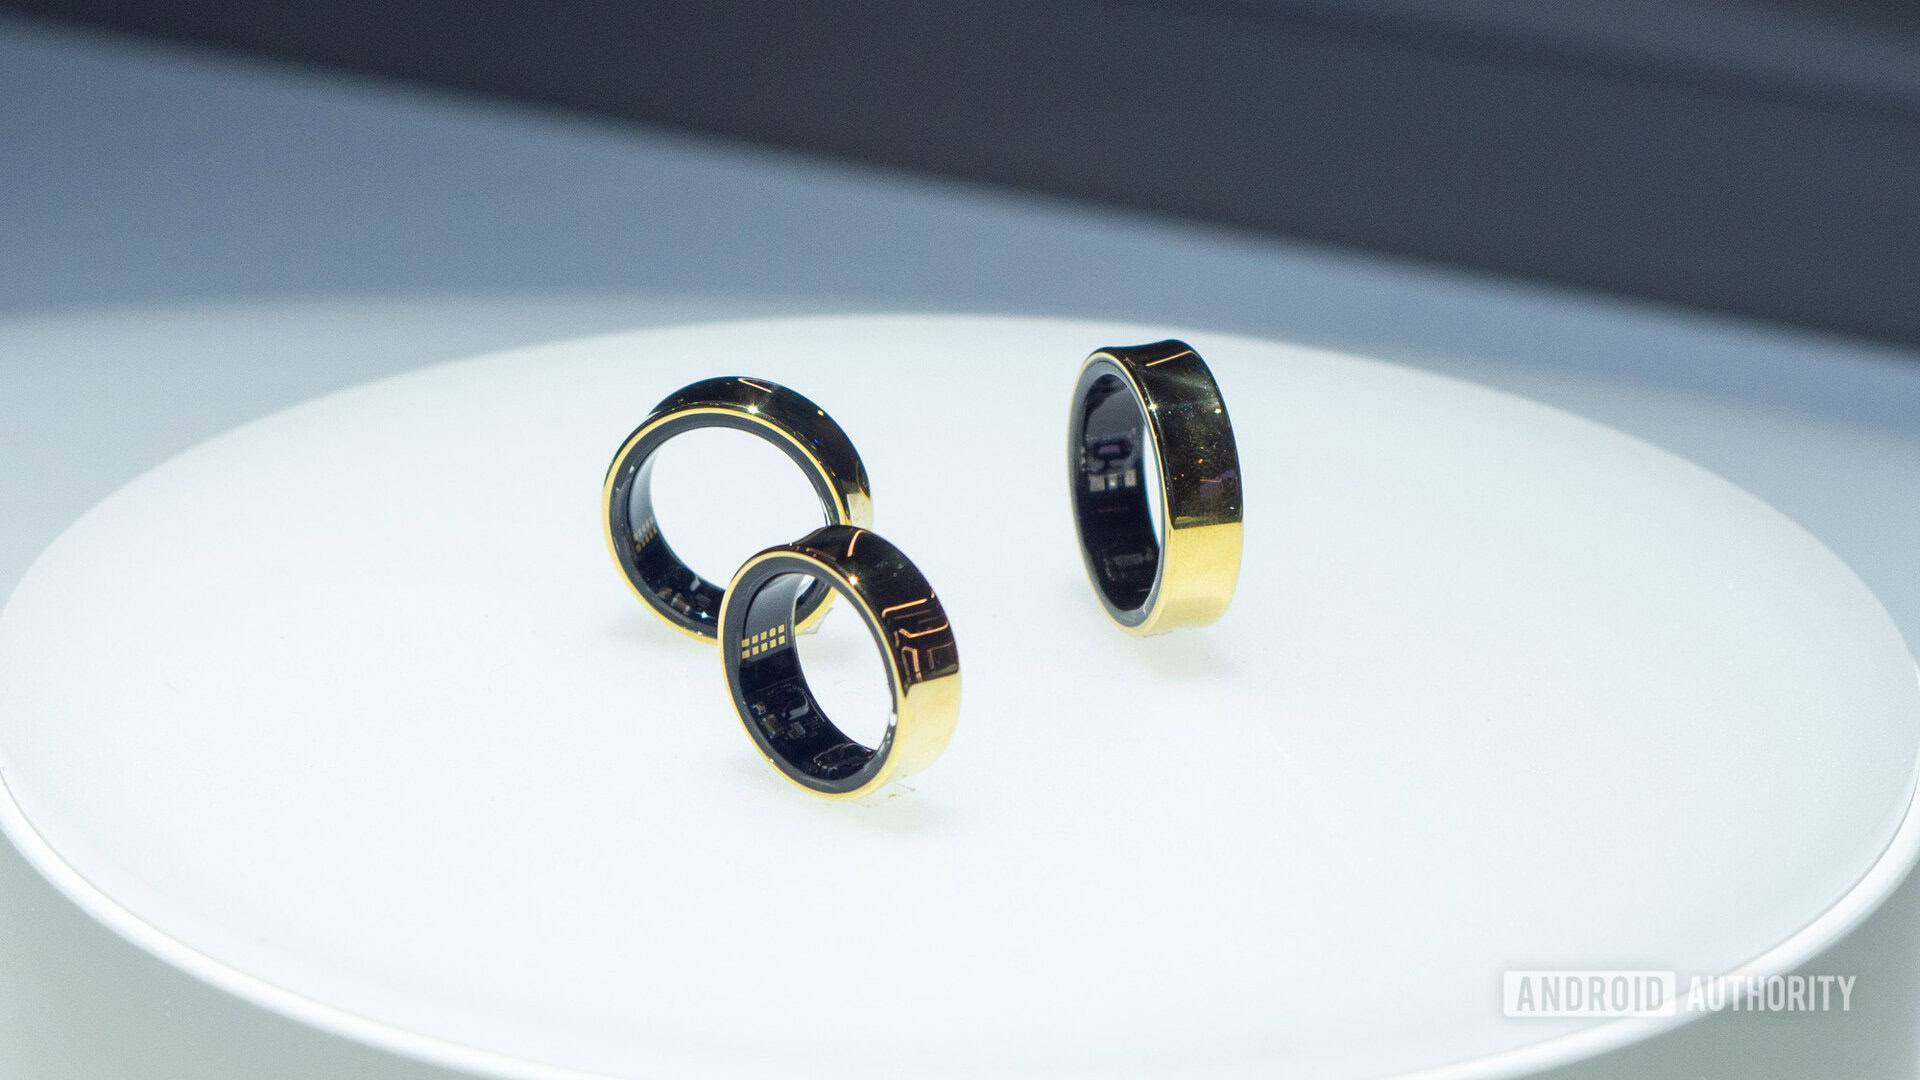 Here’s how Samsung plans to deliver the Galaxy Ring to buyers